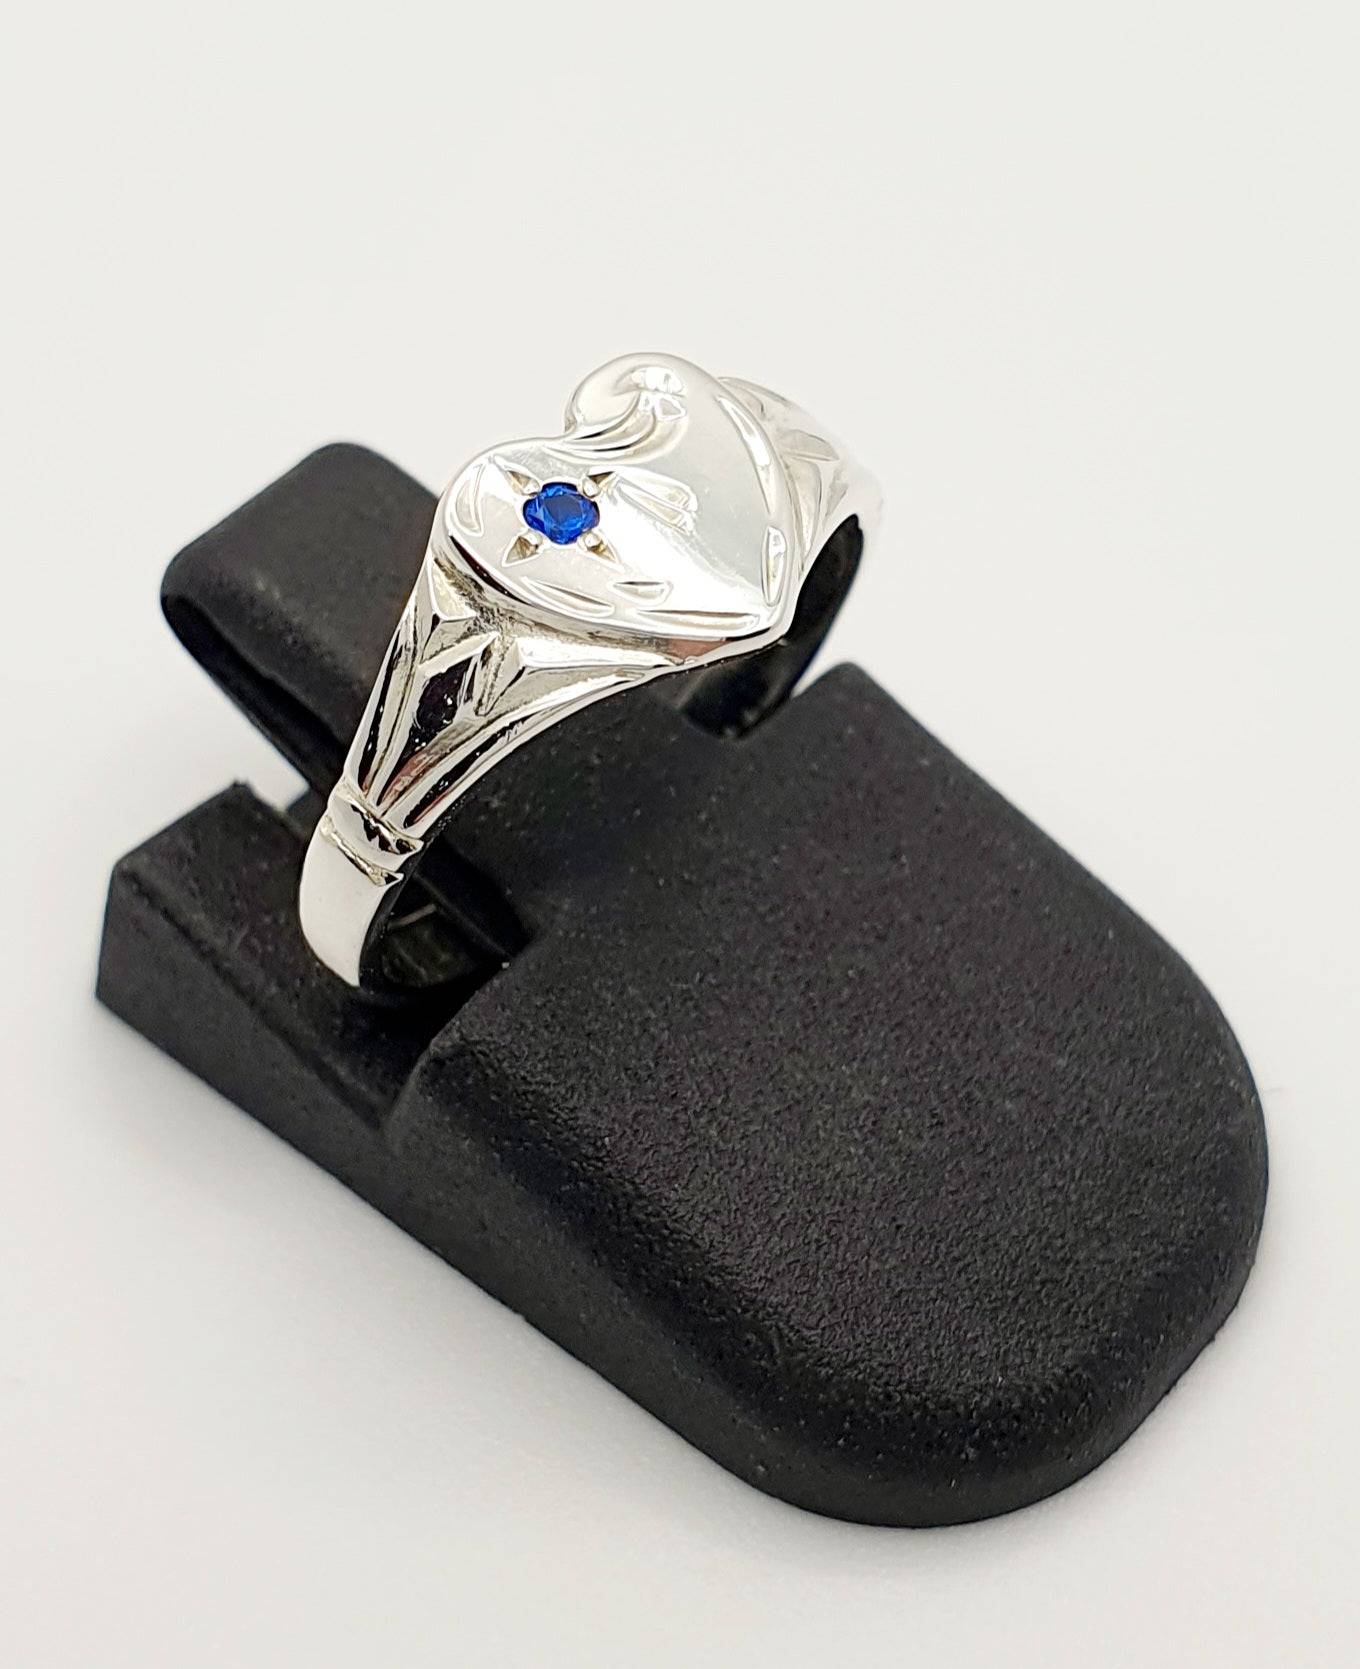 S/S Heart Signet Ring with Blue Stone. Size F